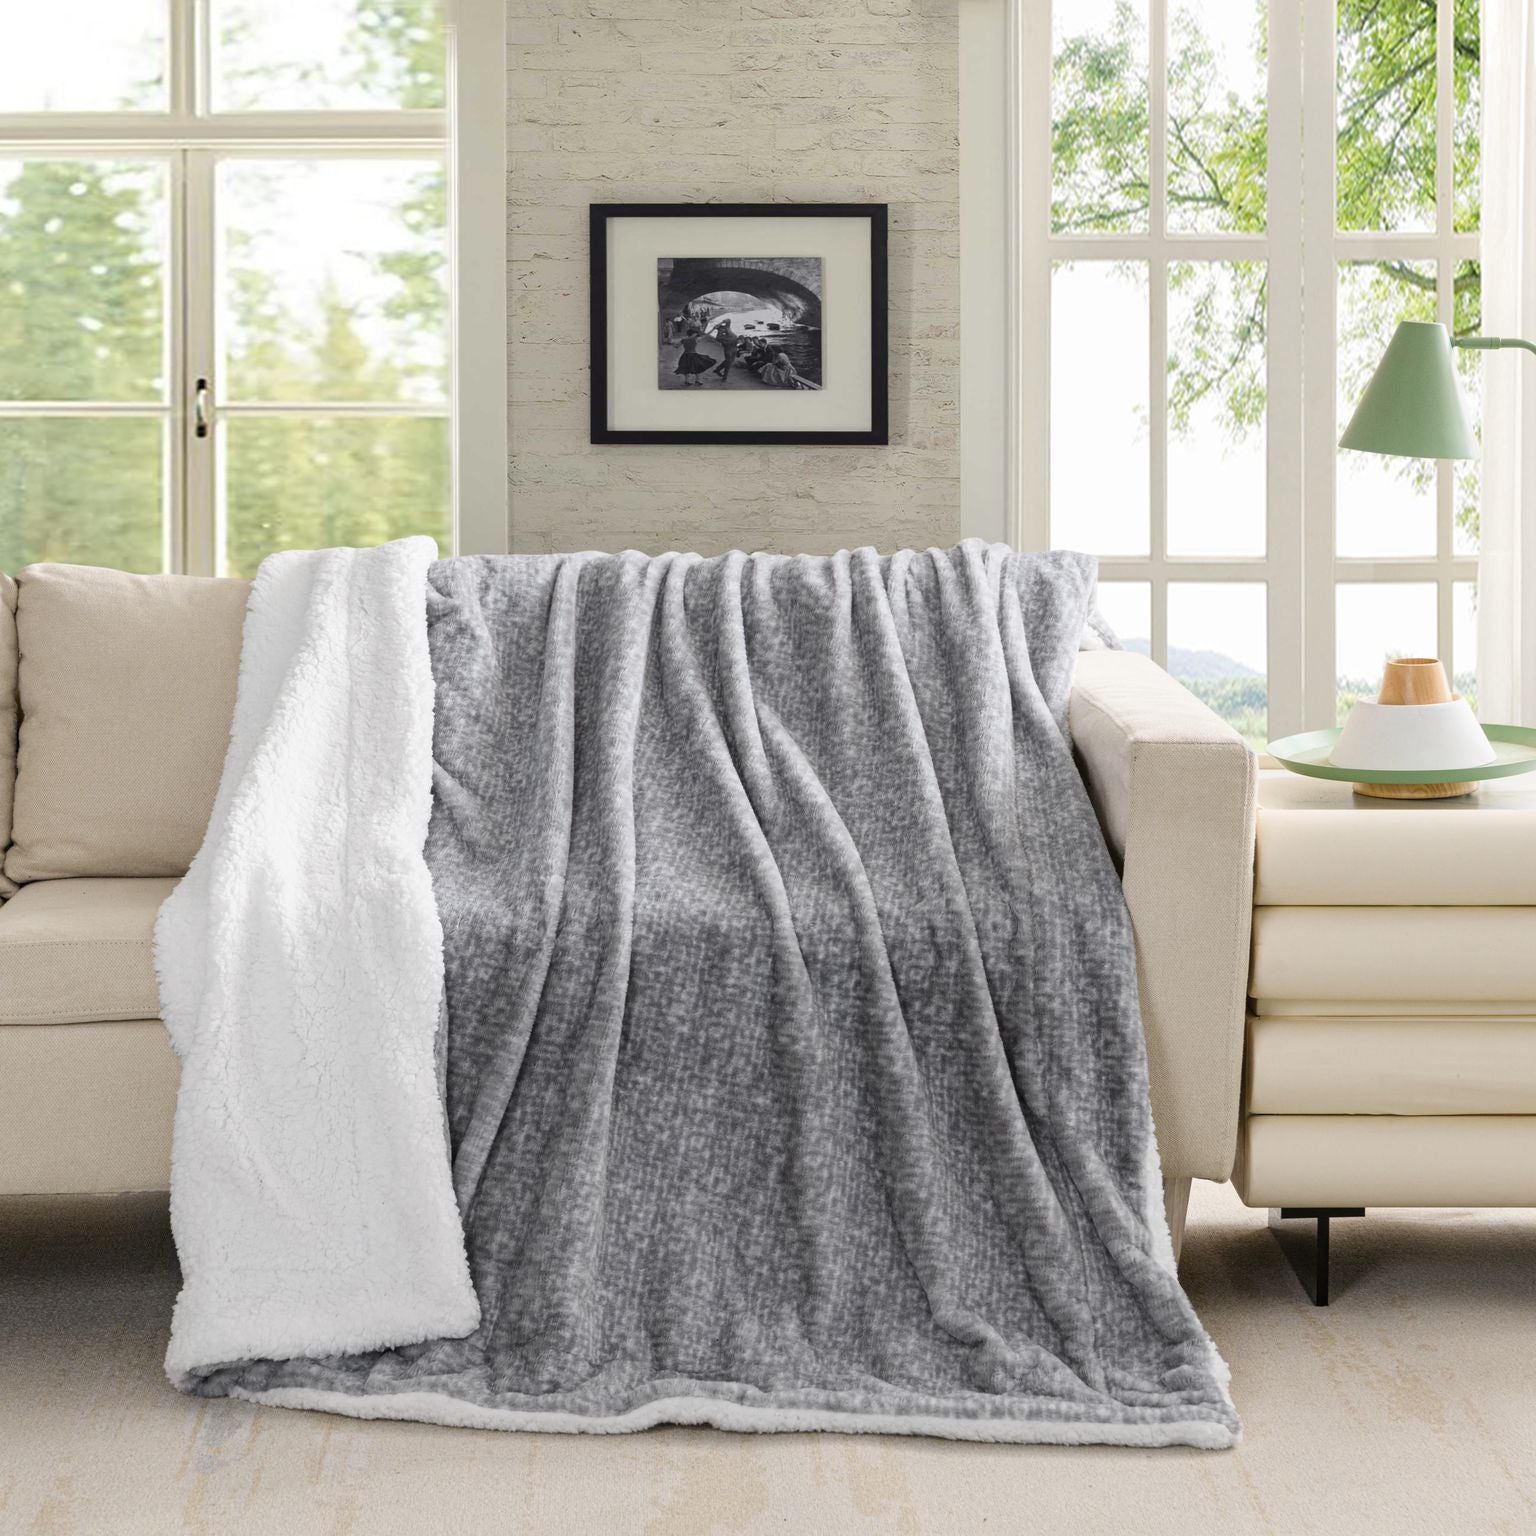 Printed Fur to Sherpa Throw Blanket 50 x 60 inches Grey Texture to White